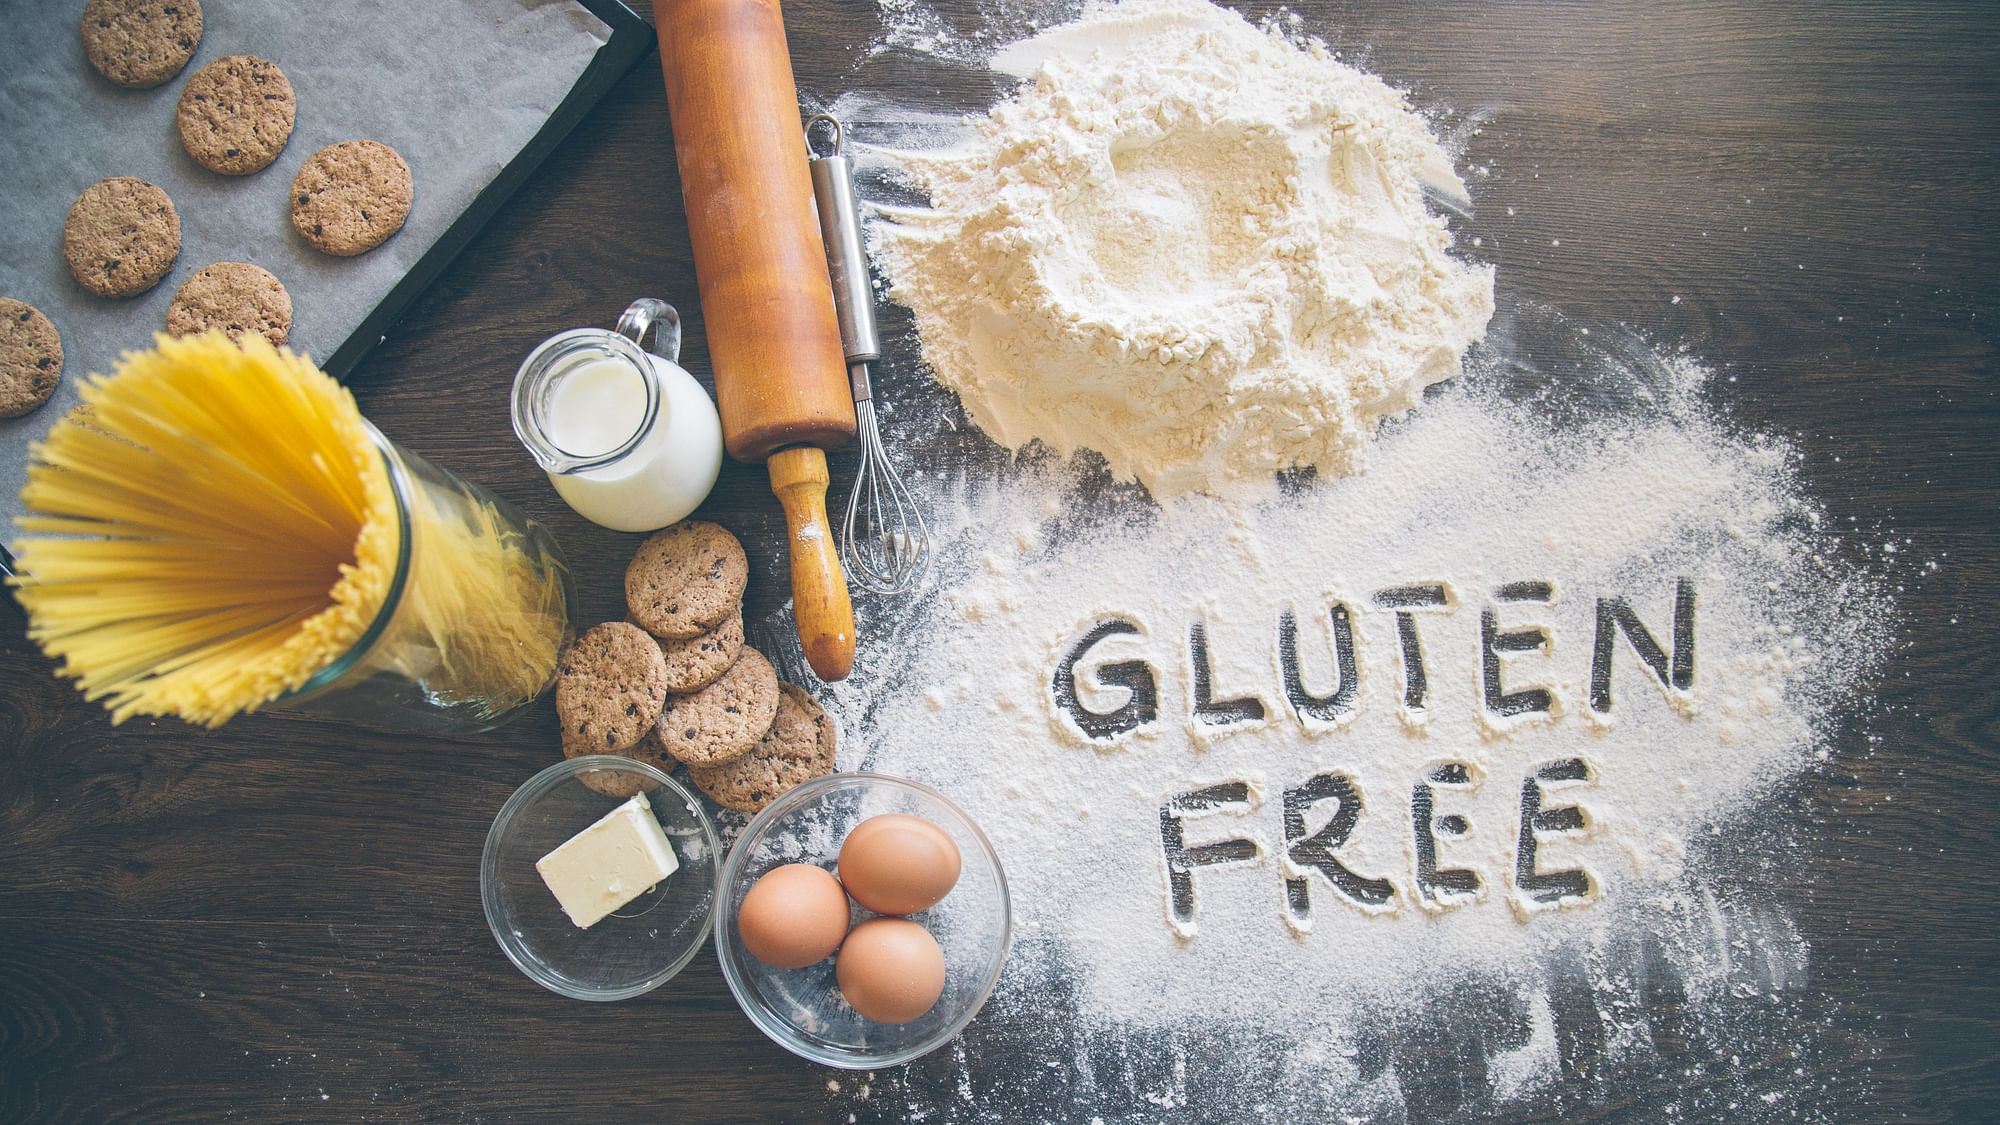 Is the gluten-free diet for you? Find out.